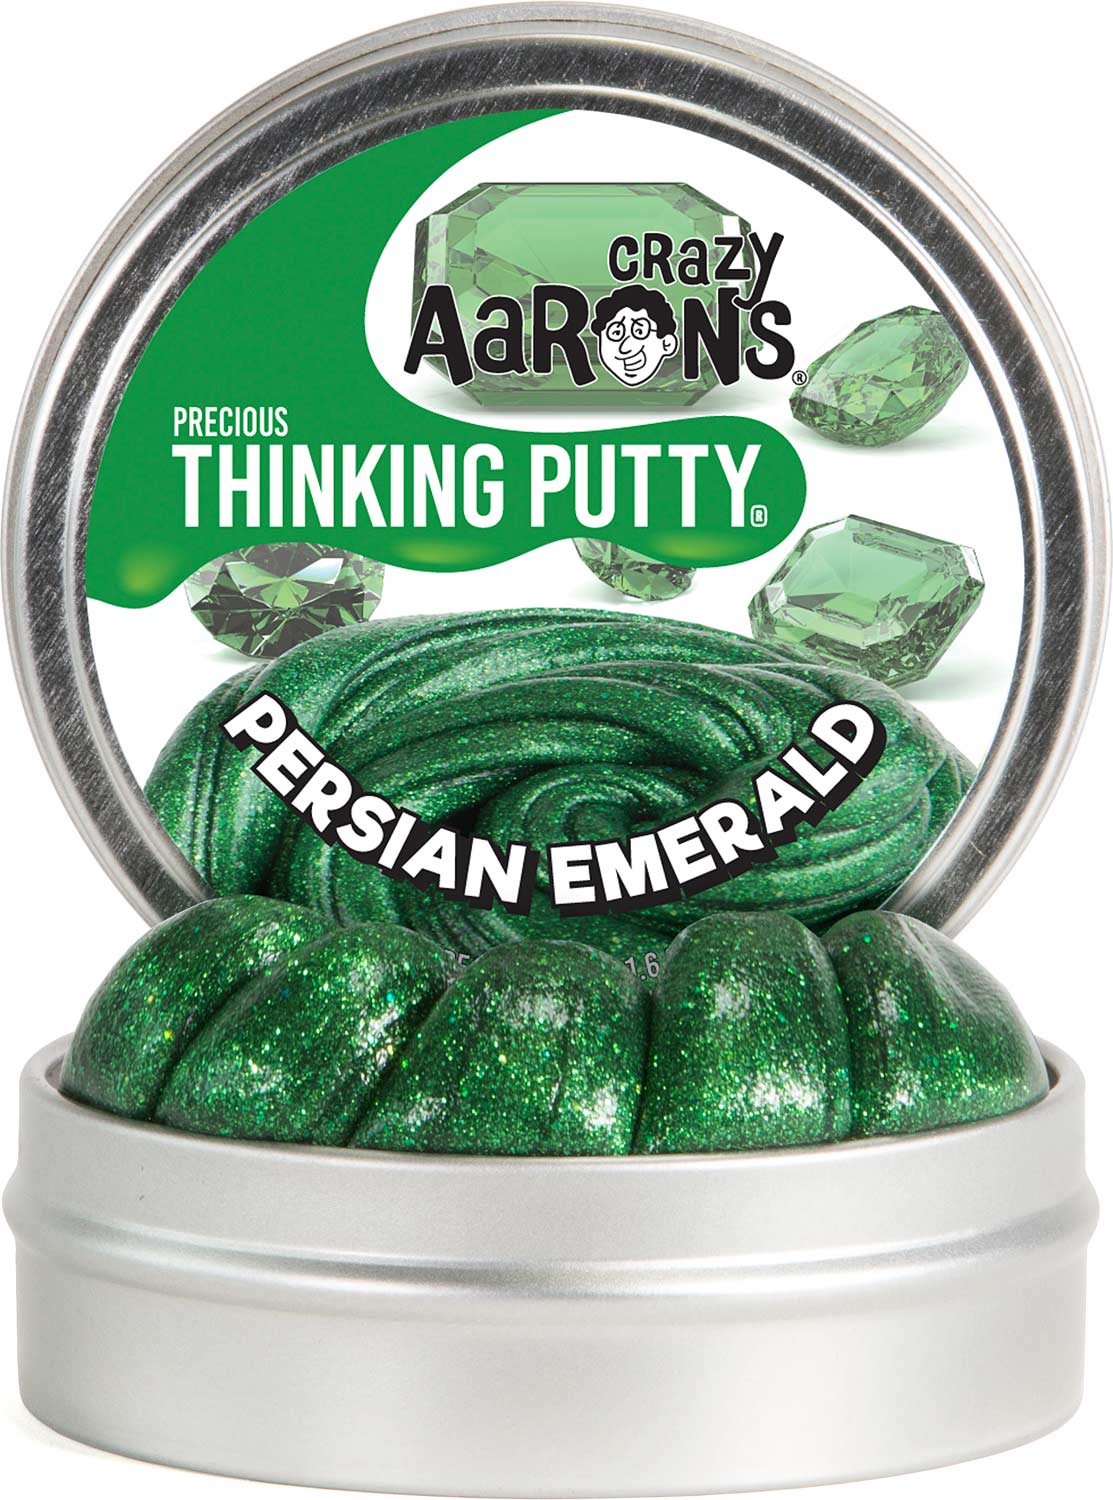 Pr011 Crazy Aaron S Putty Aarons Thinking Persian Emerald Precious Gems 019962198359 for sale online 